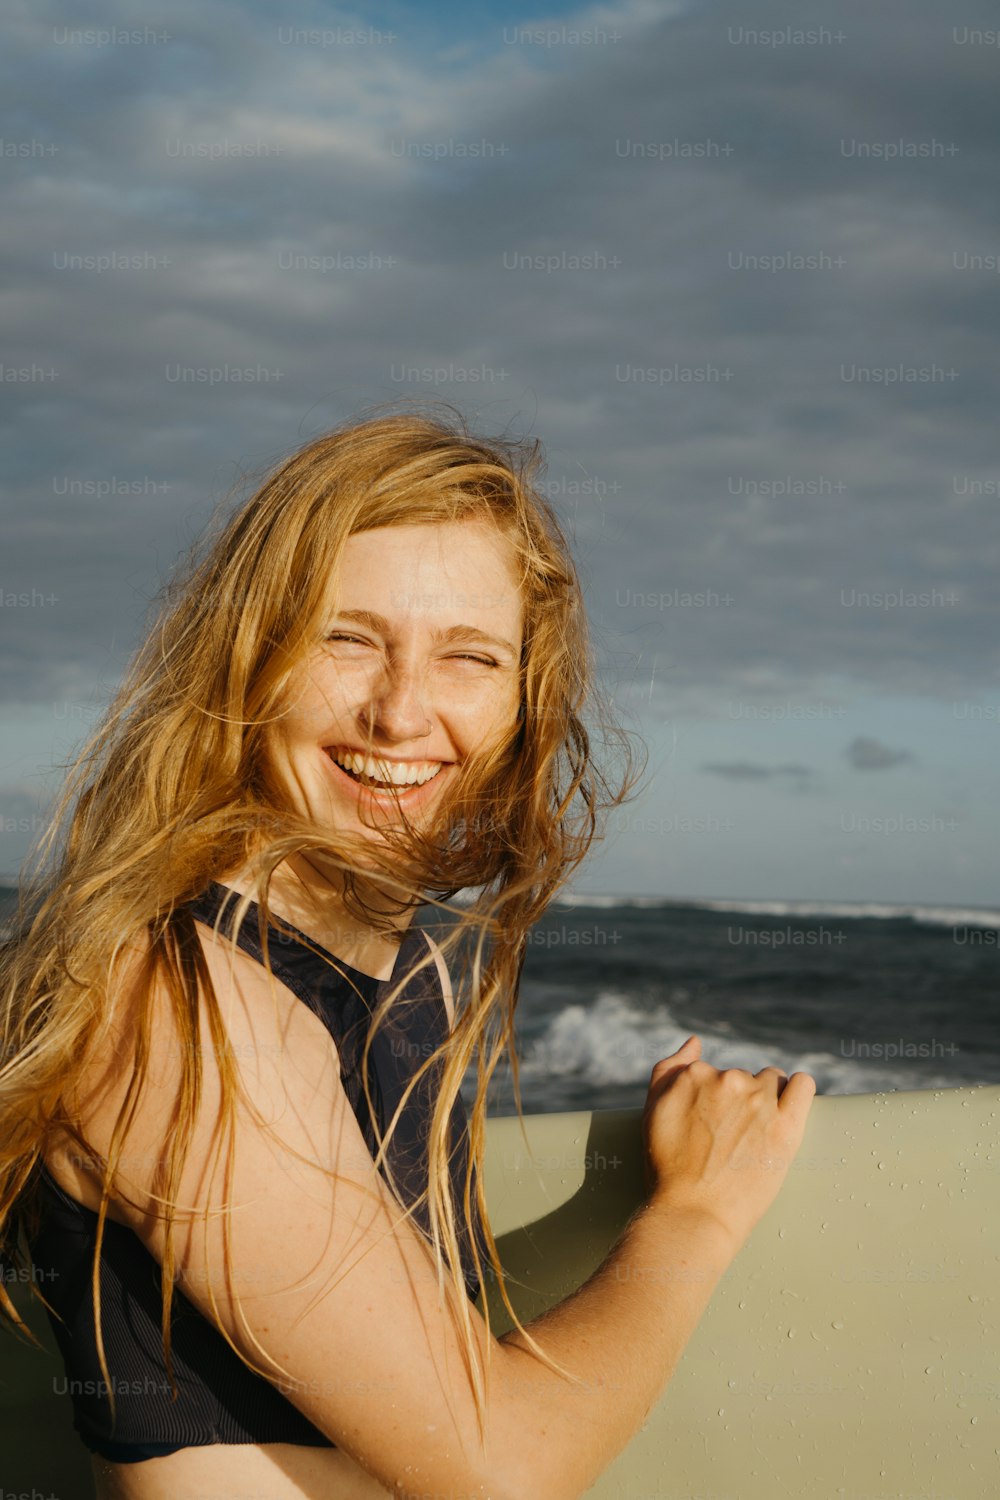 a woman with long blonde hair holding a surfboard